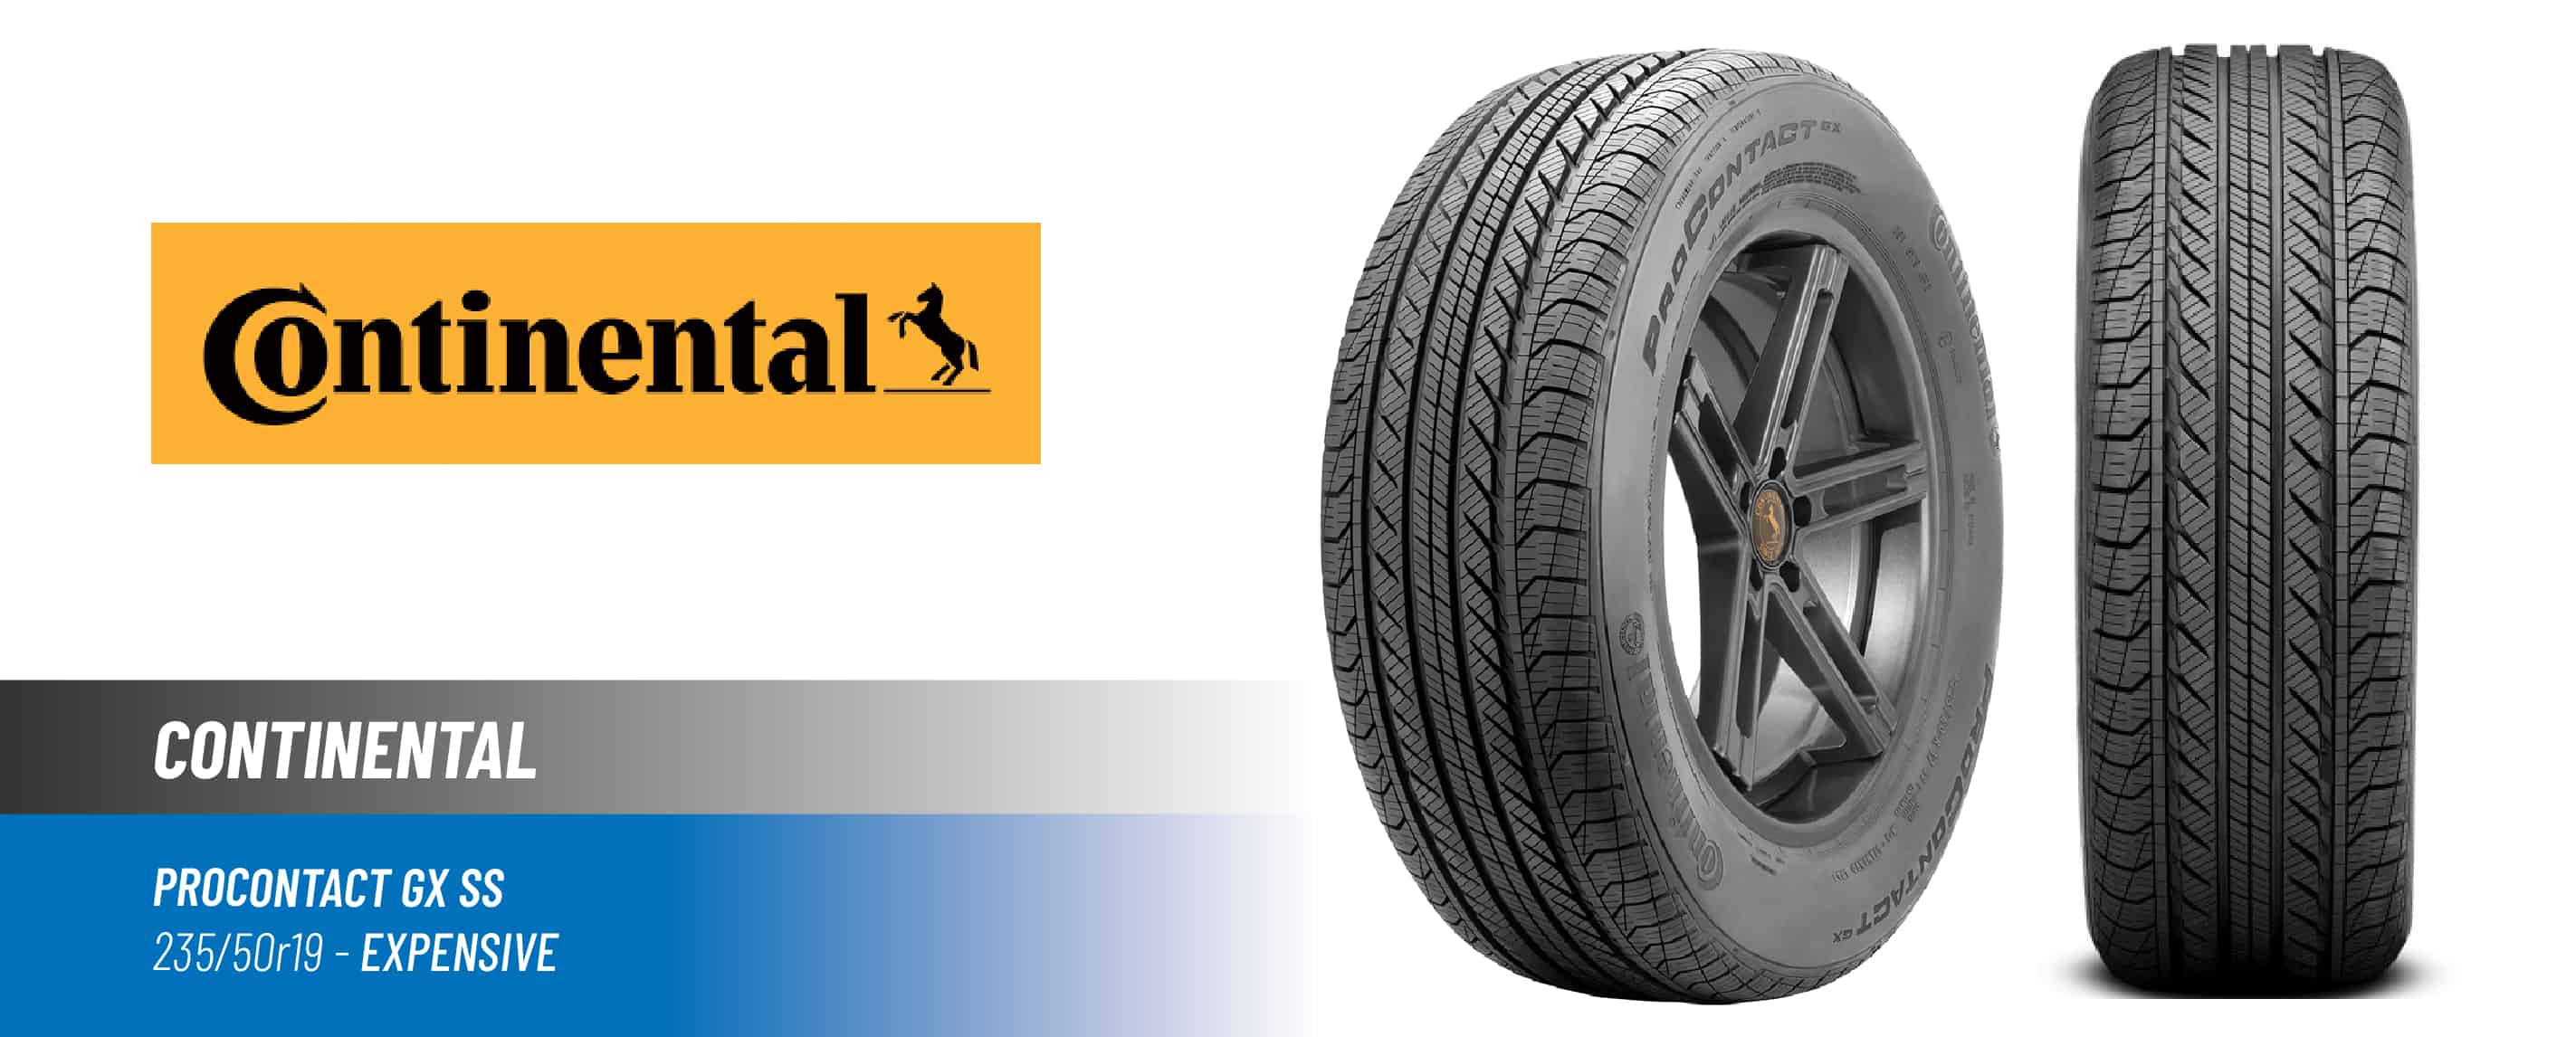 Top#5 High Price: Continental ProContact GX SSR – best 235/50 r19